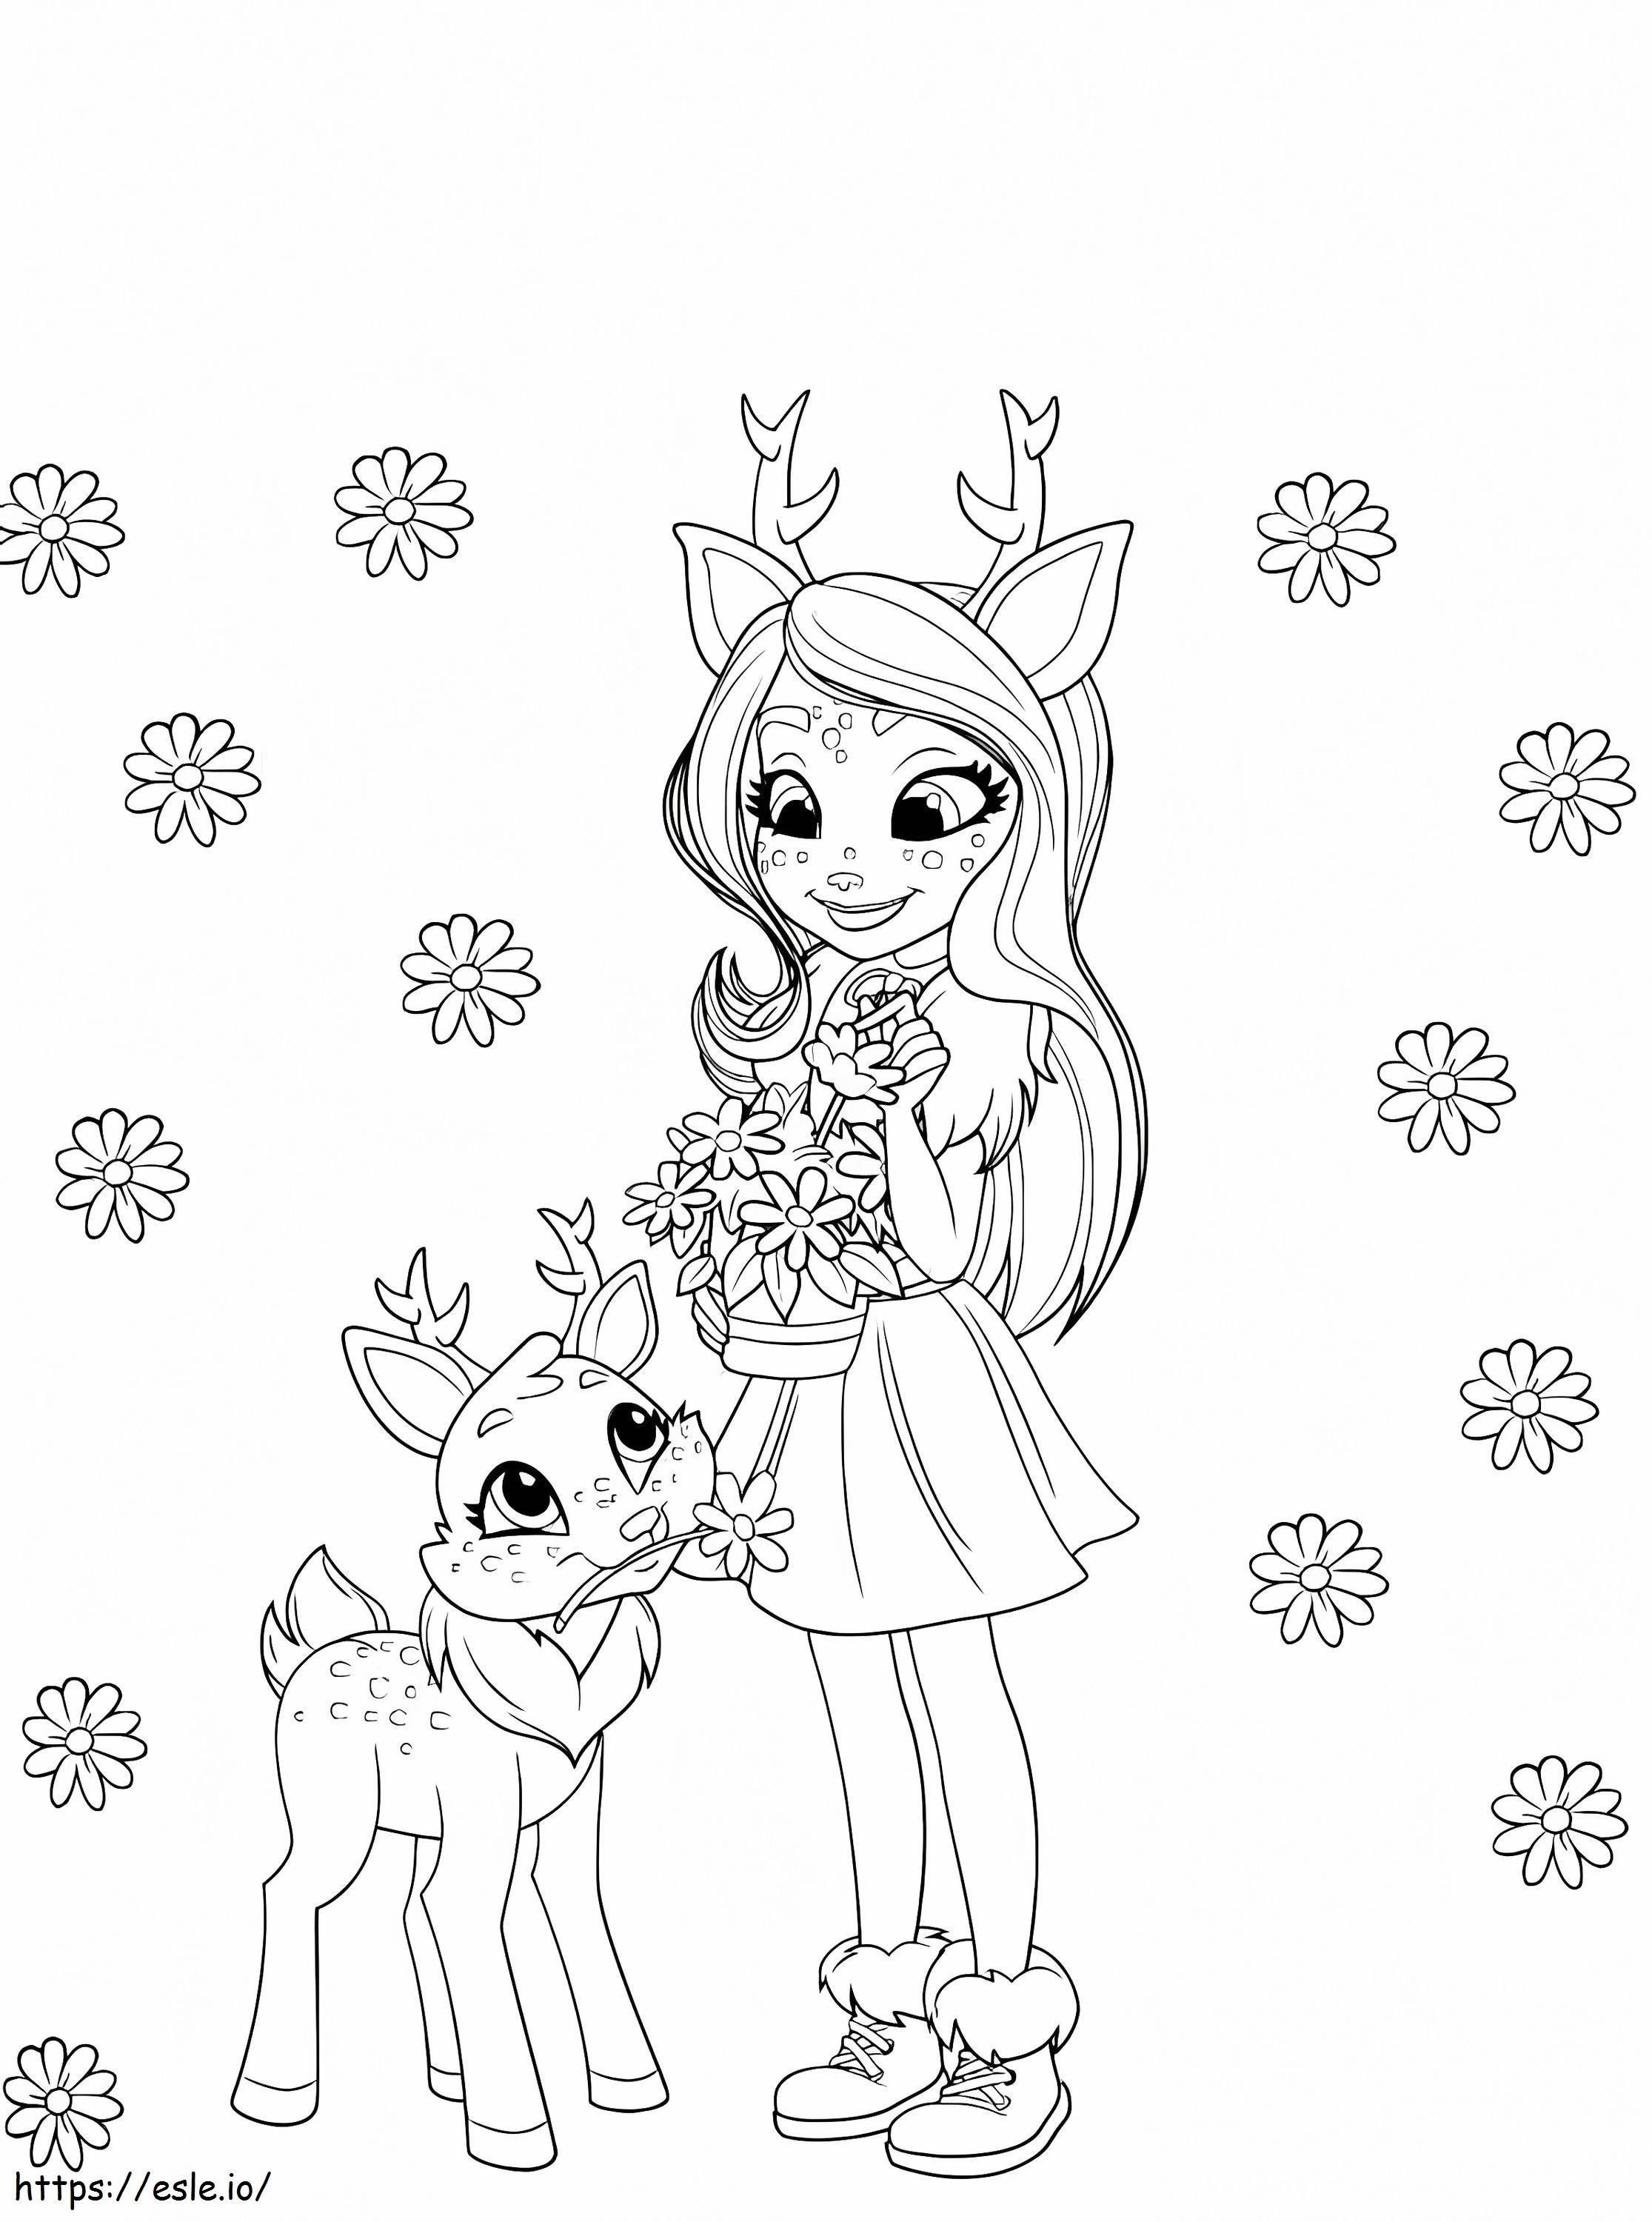 Girl And Cute Deer coloring page